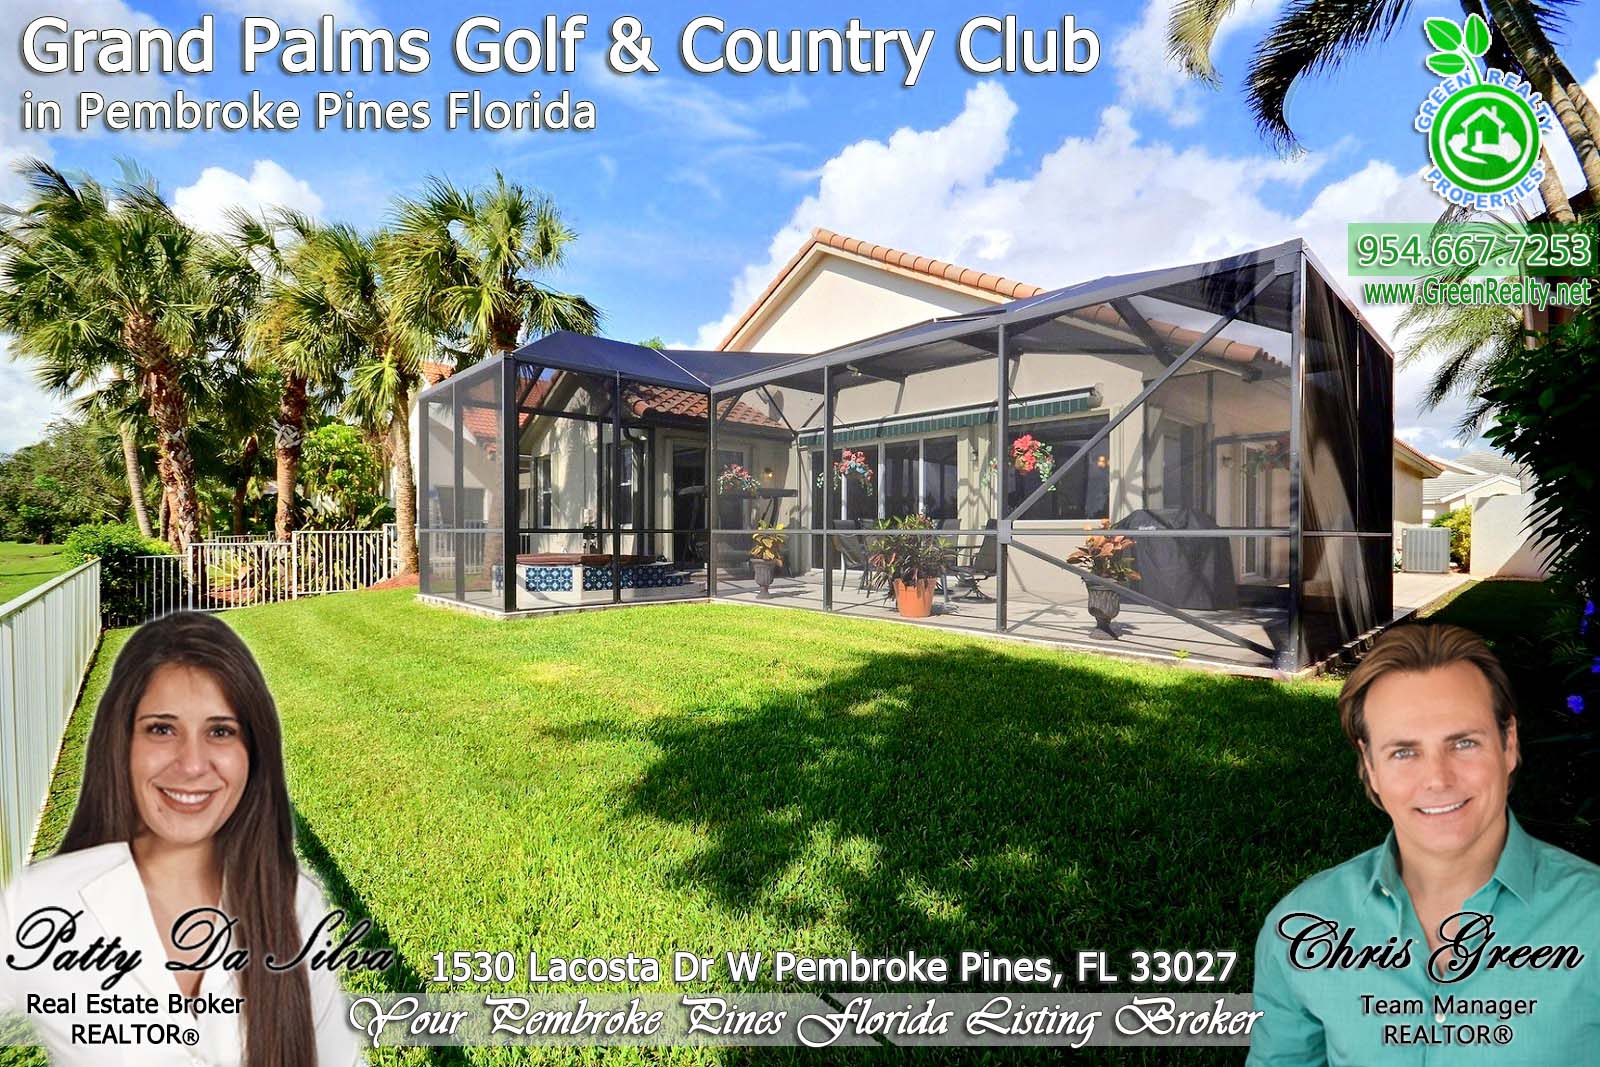 Home Values in Grand Palms Pembroke Pines FL